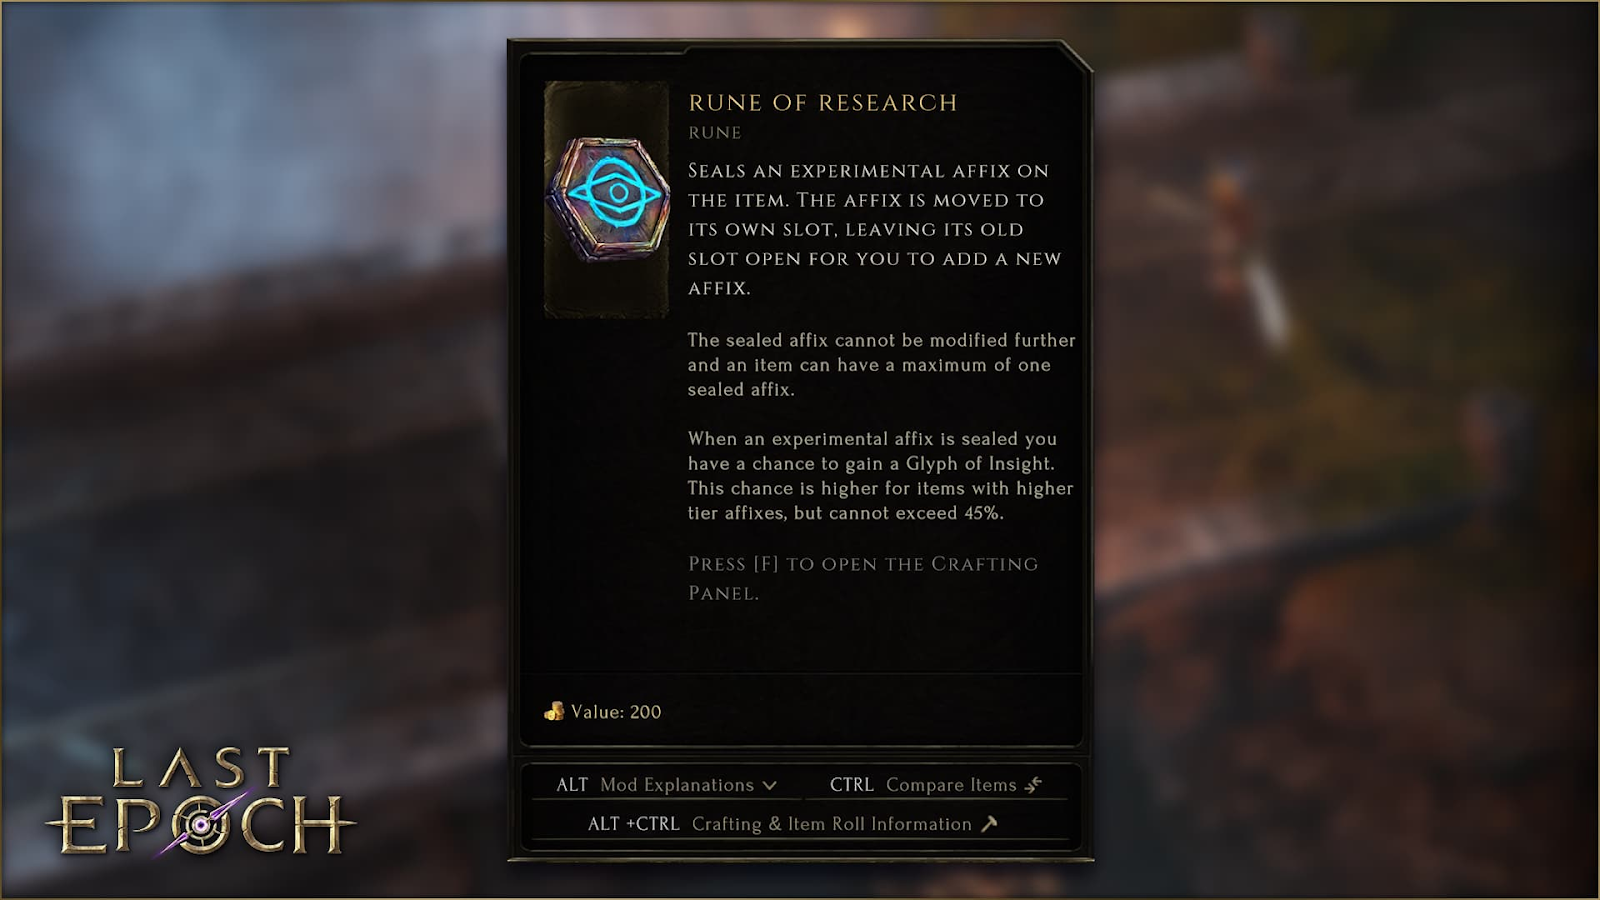 How To Get Runes of Research Last Epoch